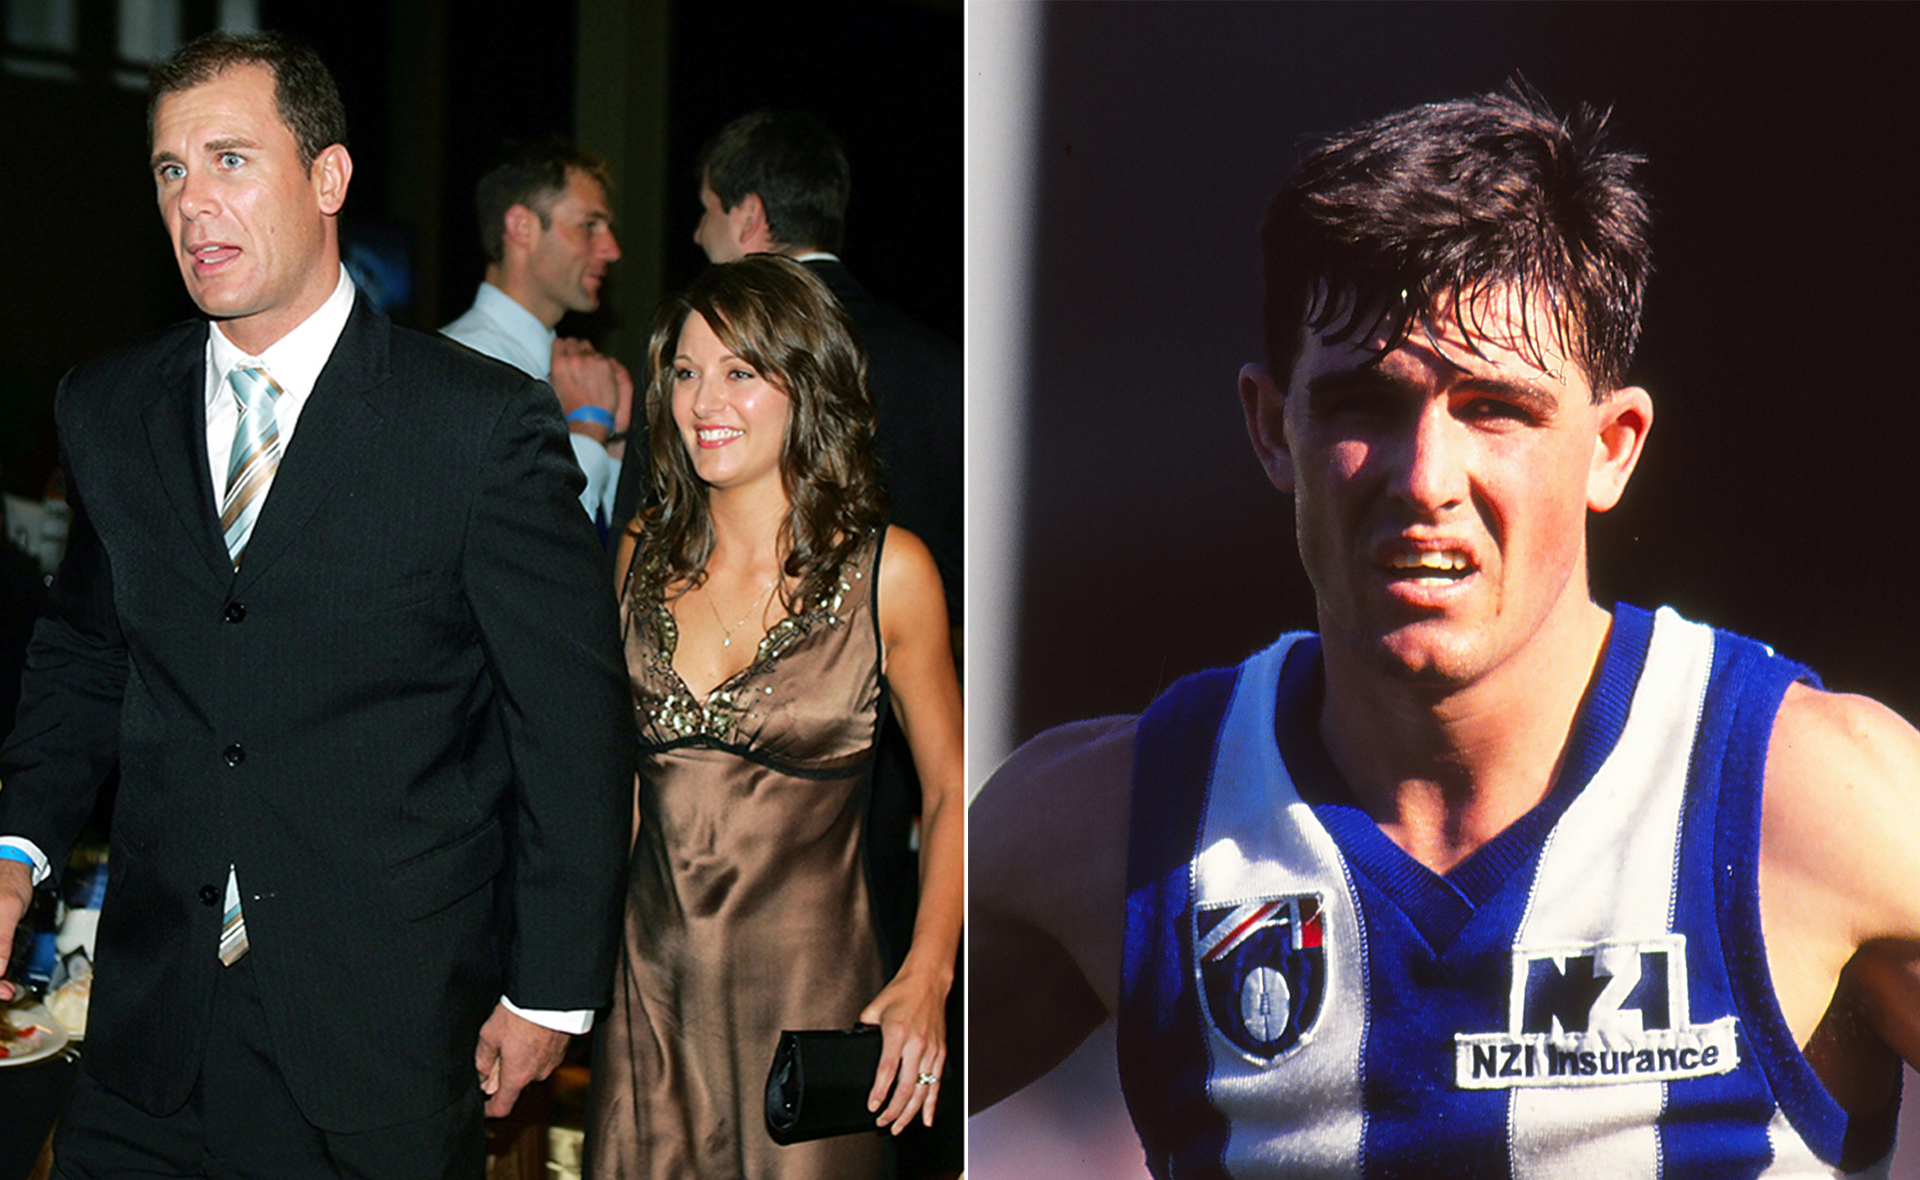 The cheating scandal that blew up the AFL: How SAS Australia star Wayne Carey was caught having an affair with his teammate’s wife